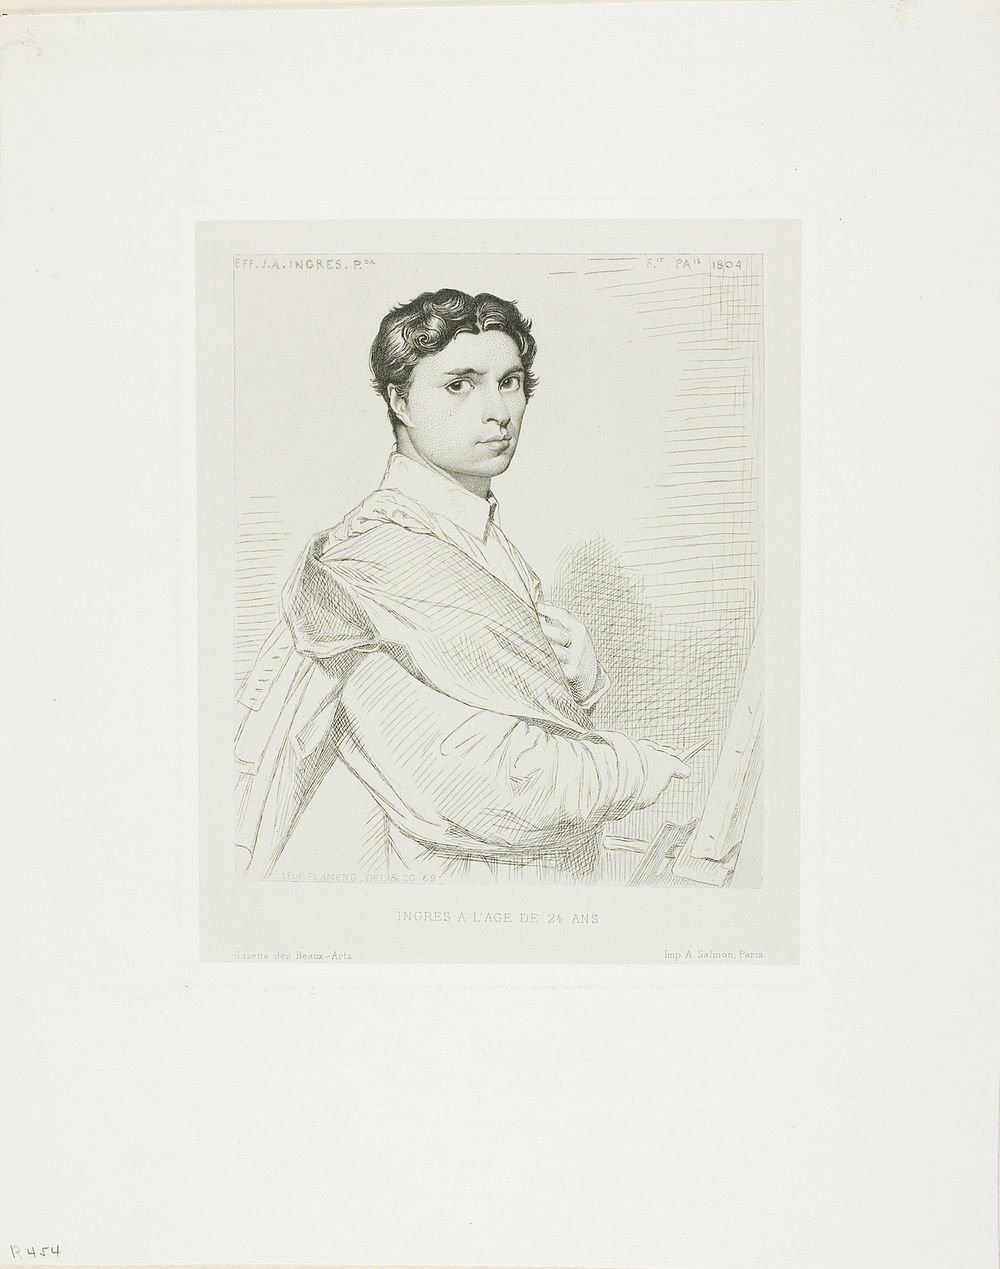 Ingres at Age Twenty-four by Léopold Flameng